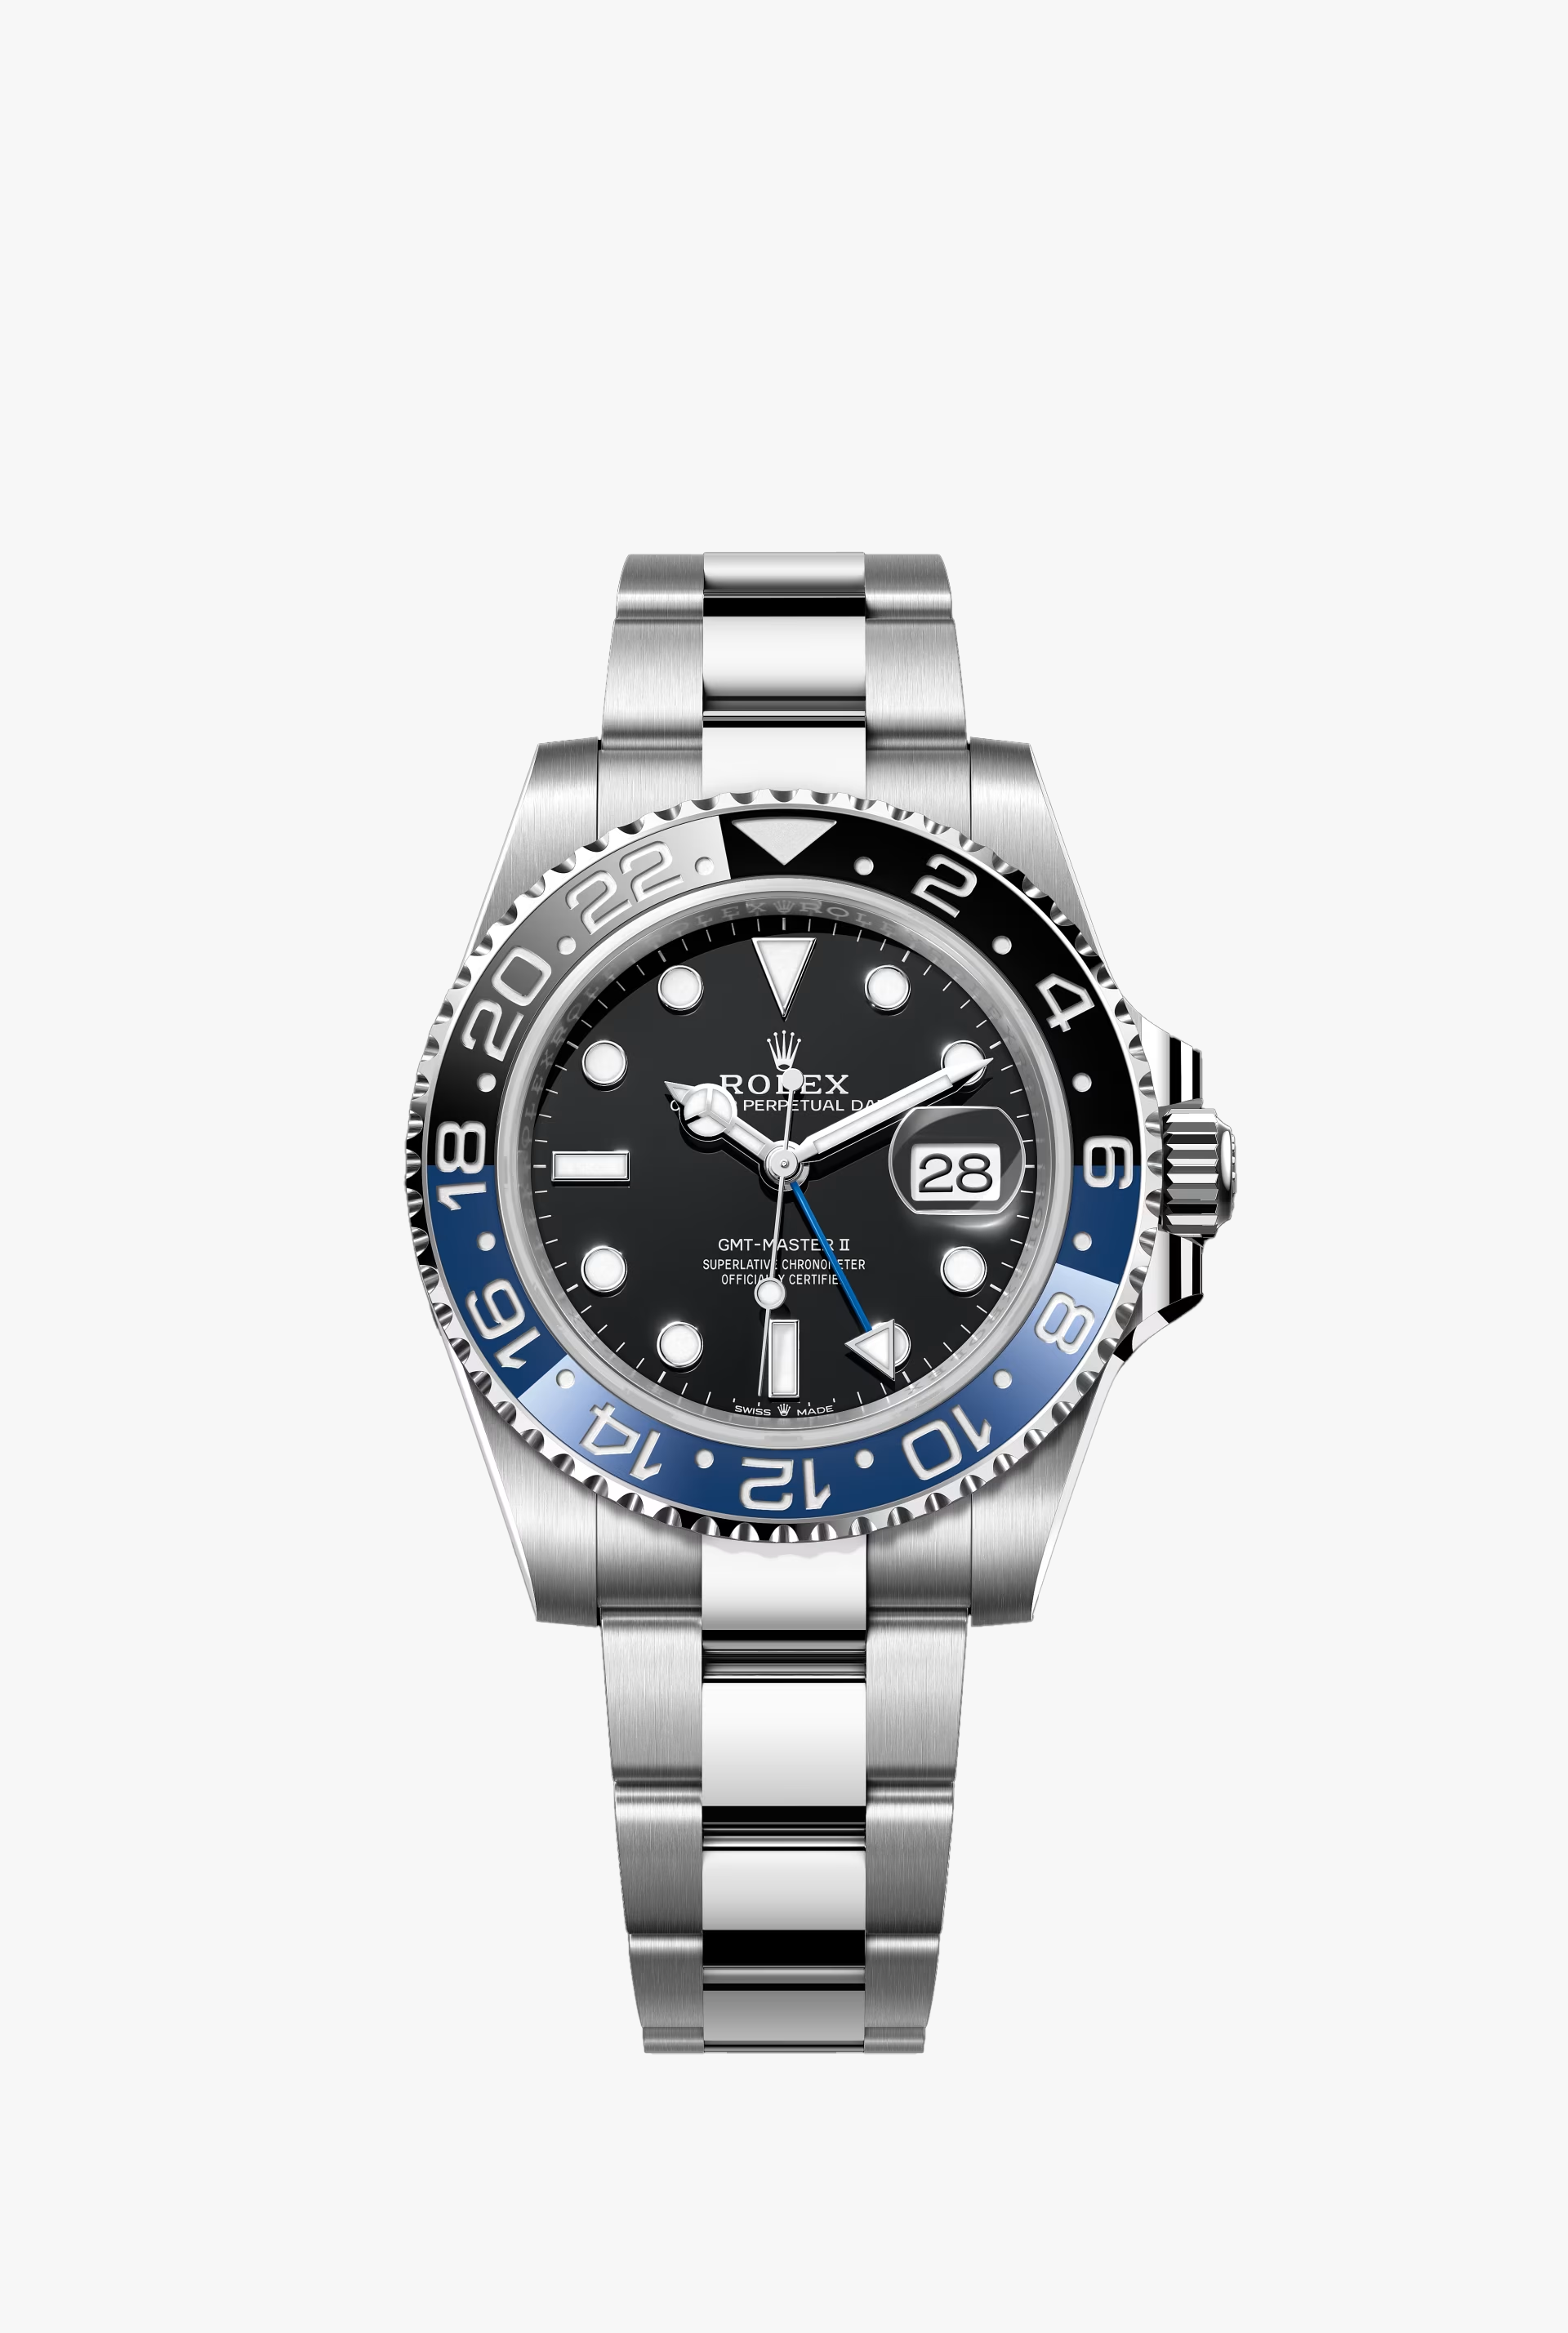 Rolex GMT-Masterl Oyster,40 mm, Oystersteel Reference 126710BLNR